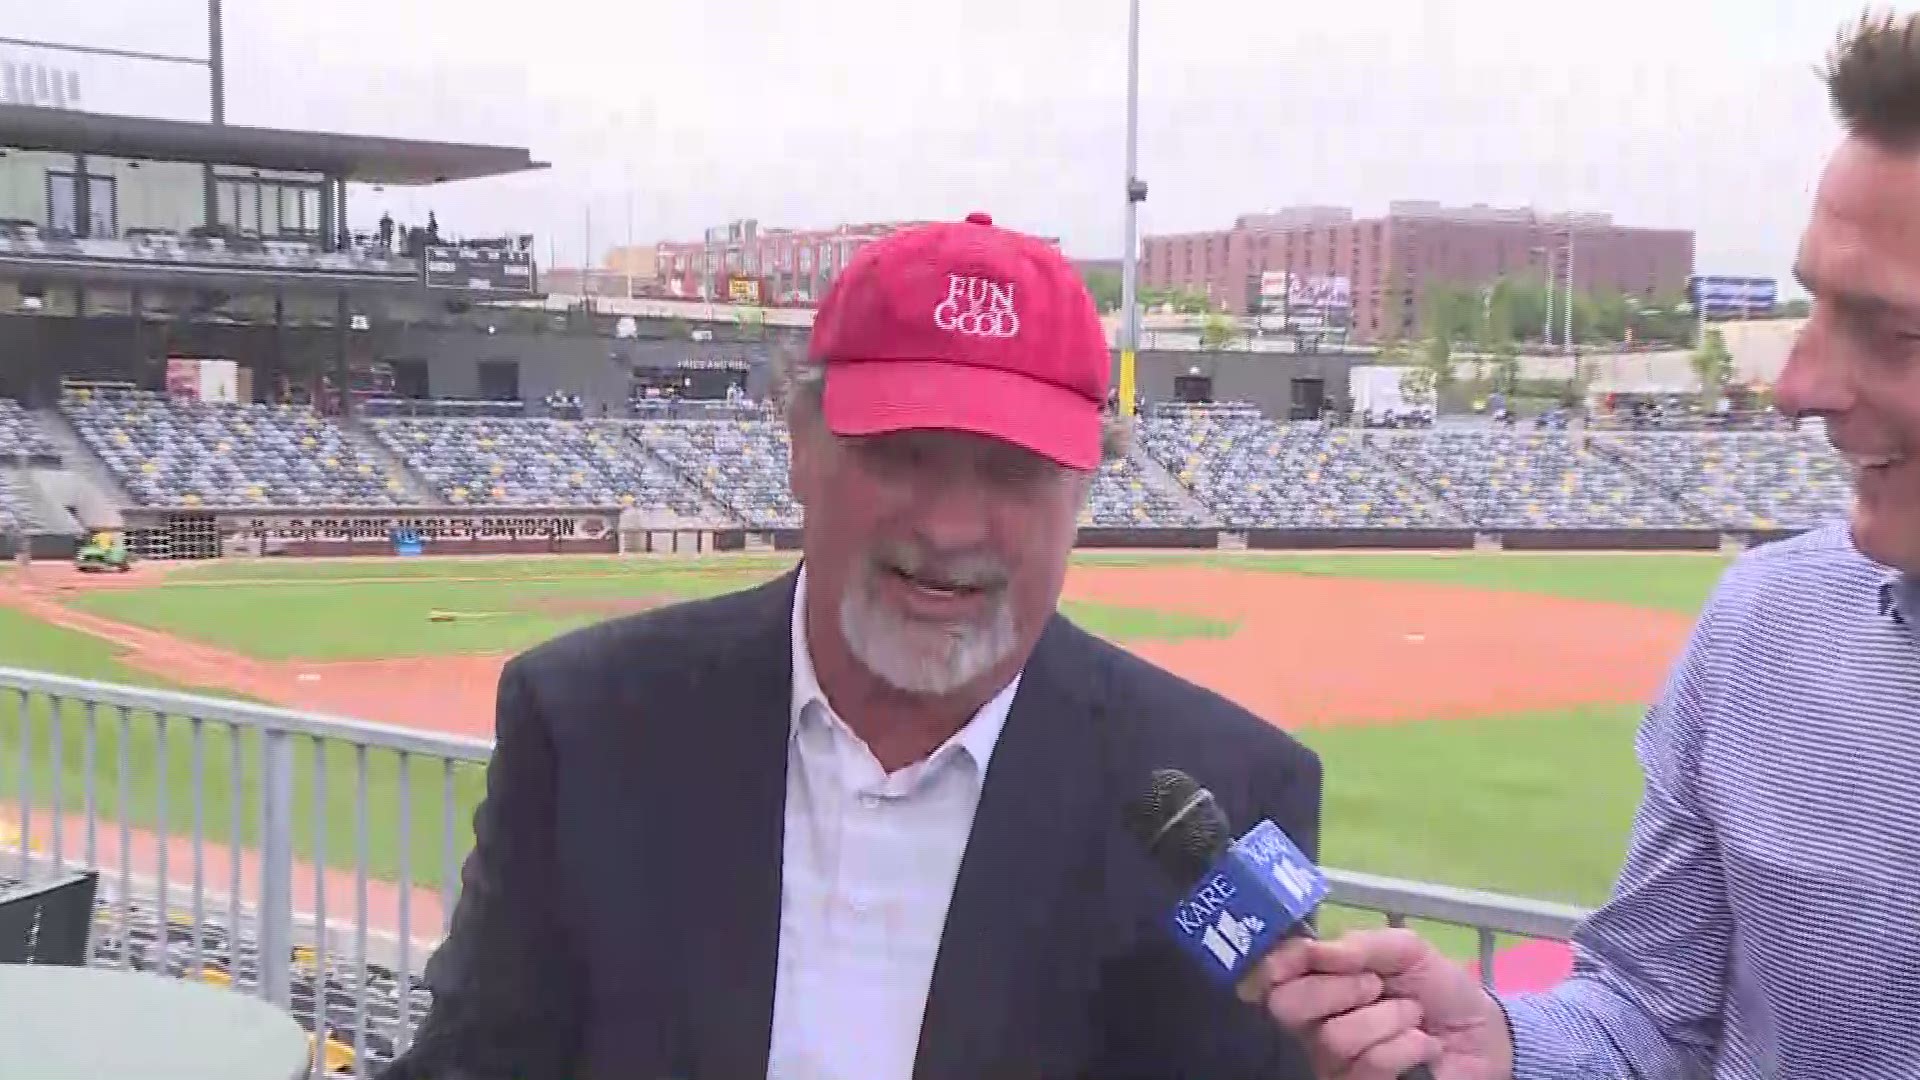 The St. Paul Saints gave their fans something to cheer about Monday in their 2018 home opener. The Saints beat the Chicago Dogs 6-4. Perk caught up with the co-owner of the team Mike Veeck afterwards.